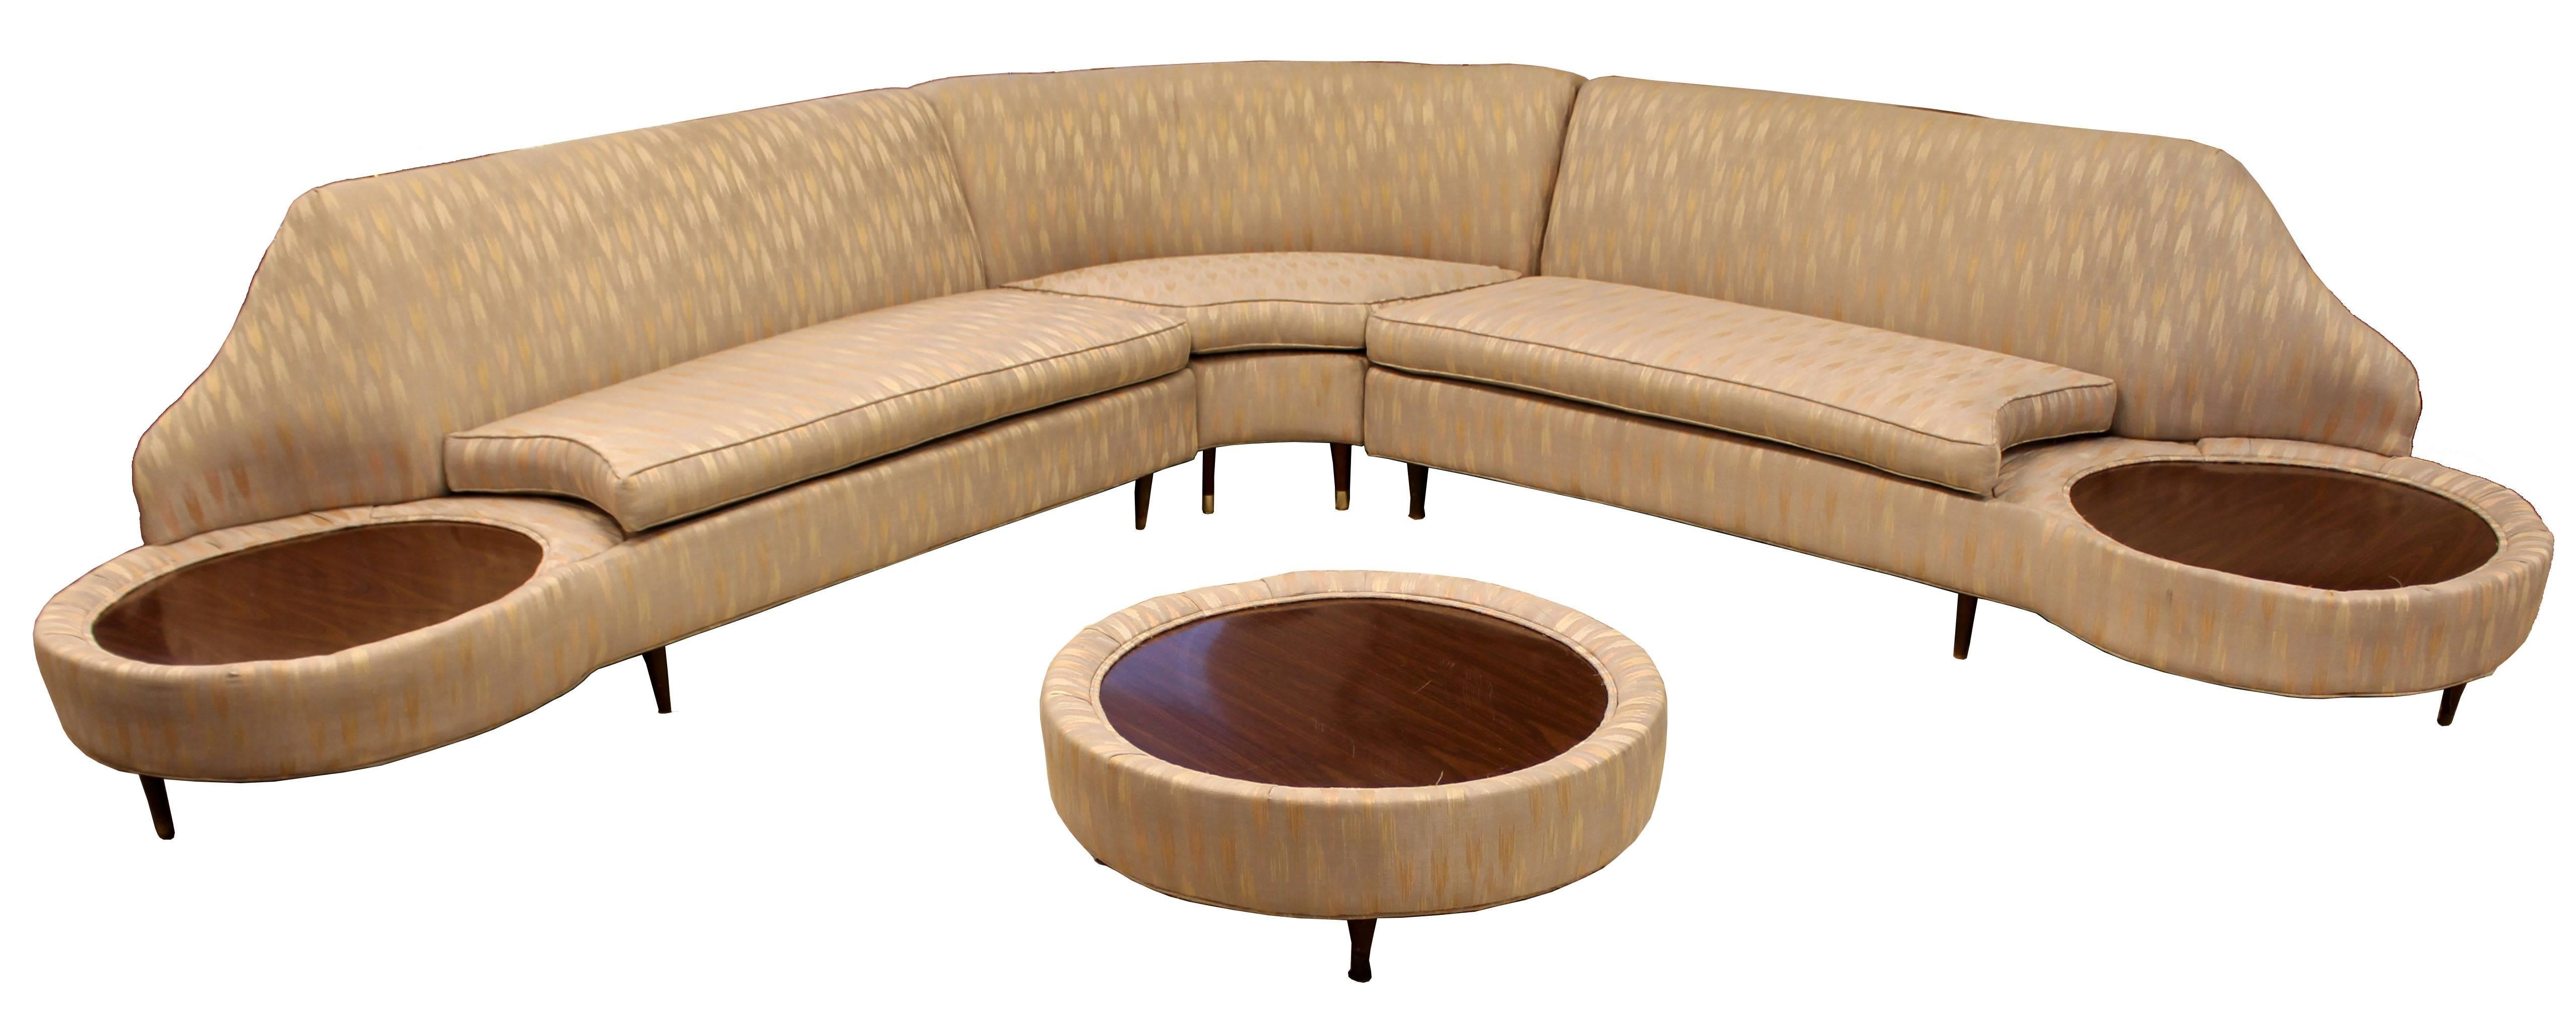 American Mid-Century Modern Three-Piece Curved Sofa Sectional Ottoman Side Tables